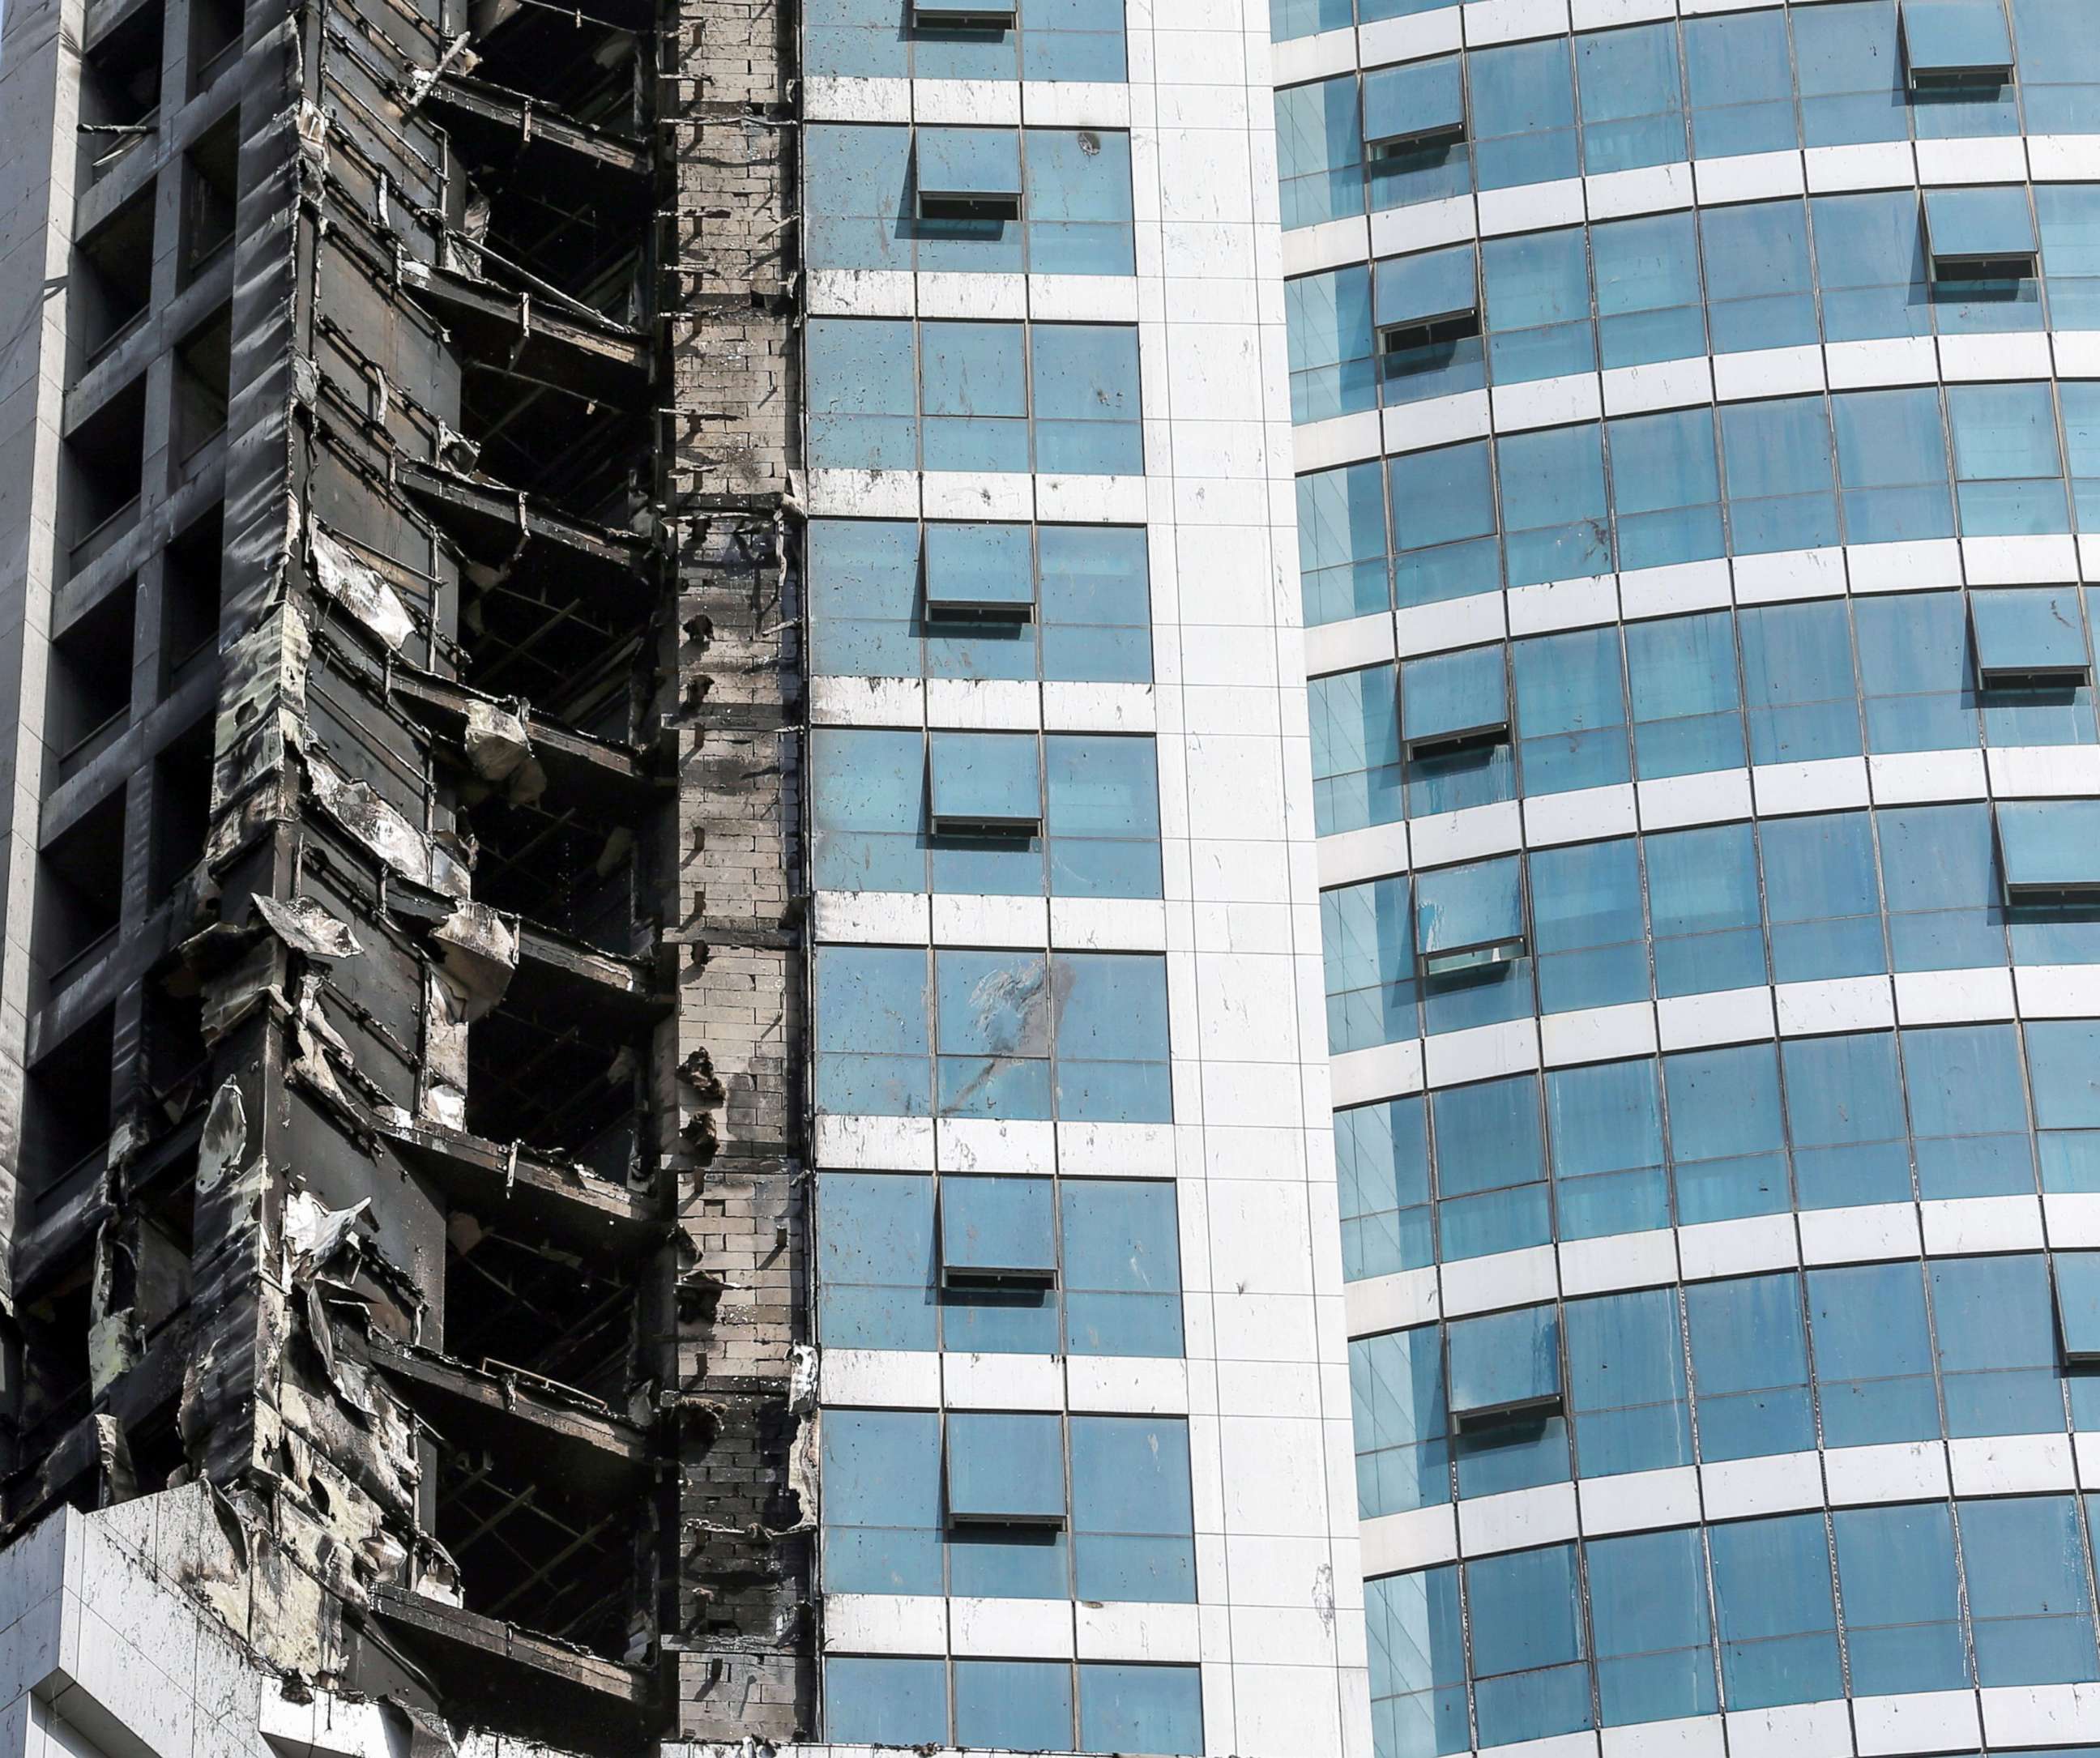 PHOTO: The fire damage to "The Torch", one of the tallest towers in Dubai, after a fire blaze ripped through it early in the morning of Aug. 4, 2017. 
